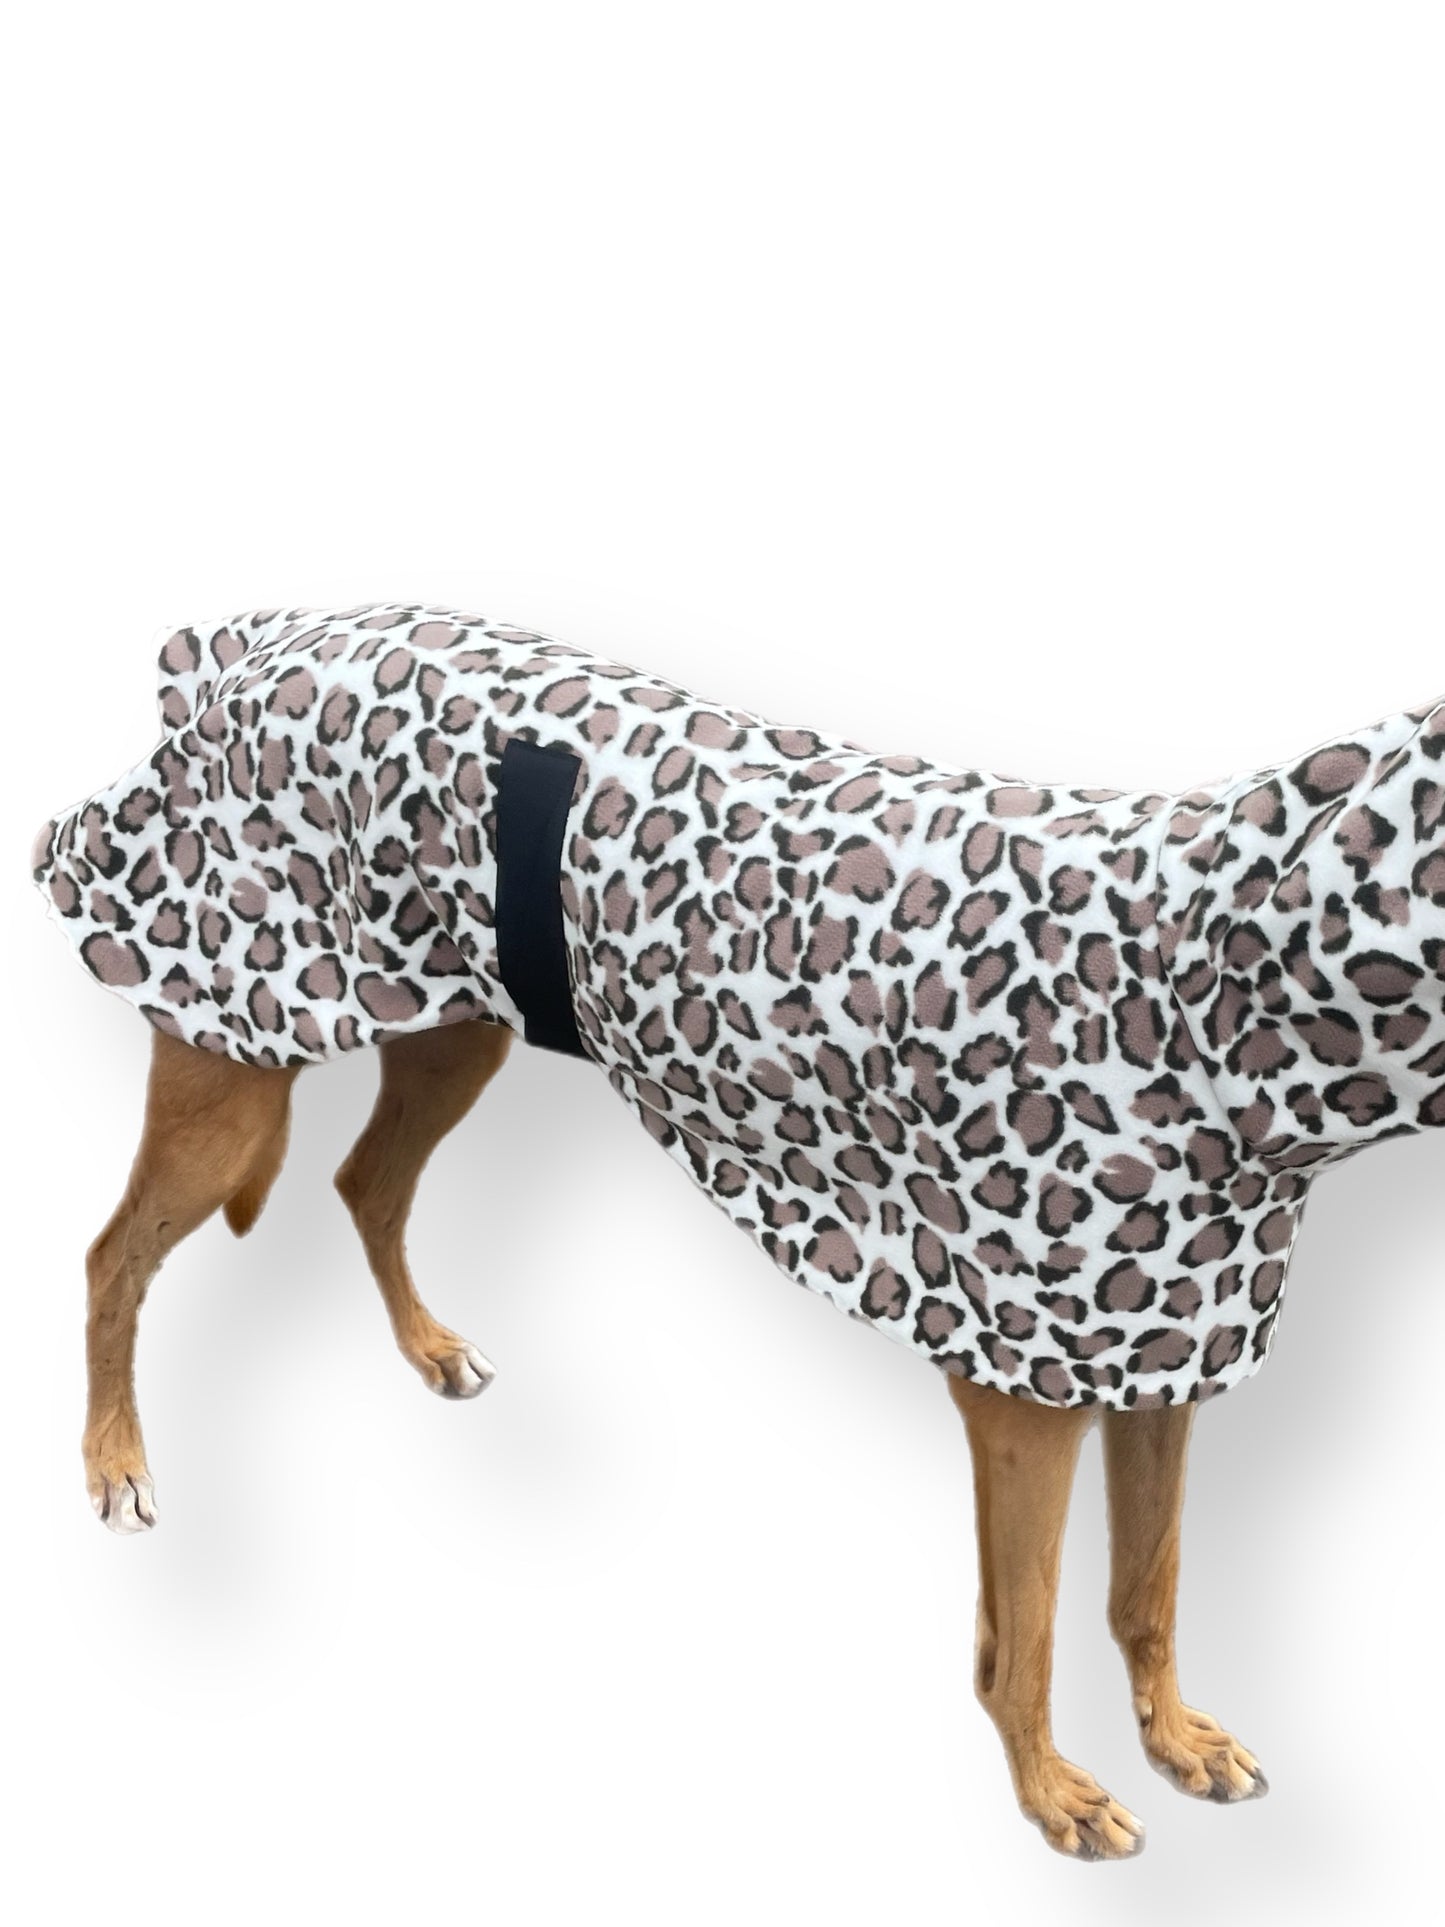 Greyhound Deluxe style coat rug double extra thick polar fleece leopard print washable extra wide hoodie